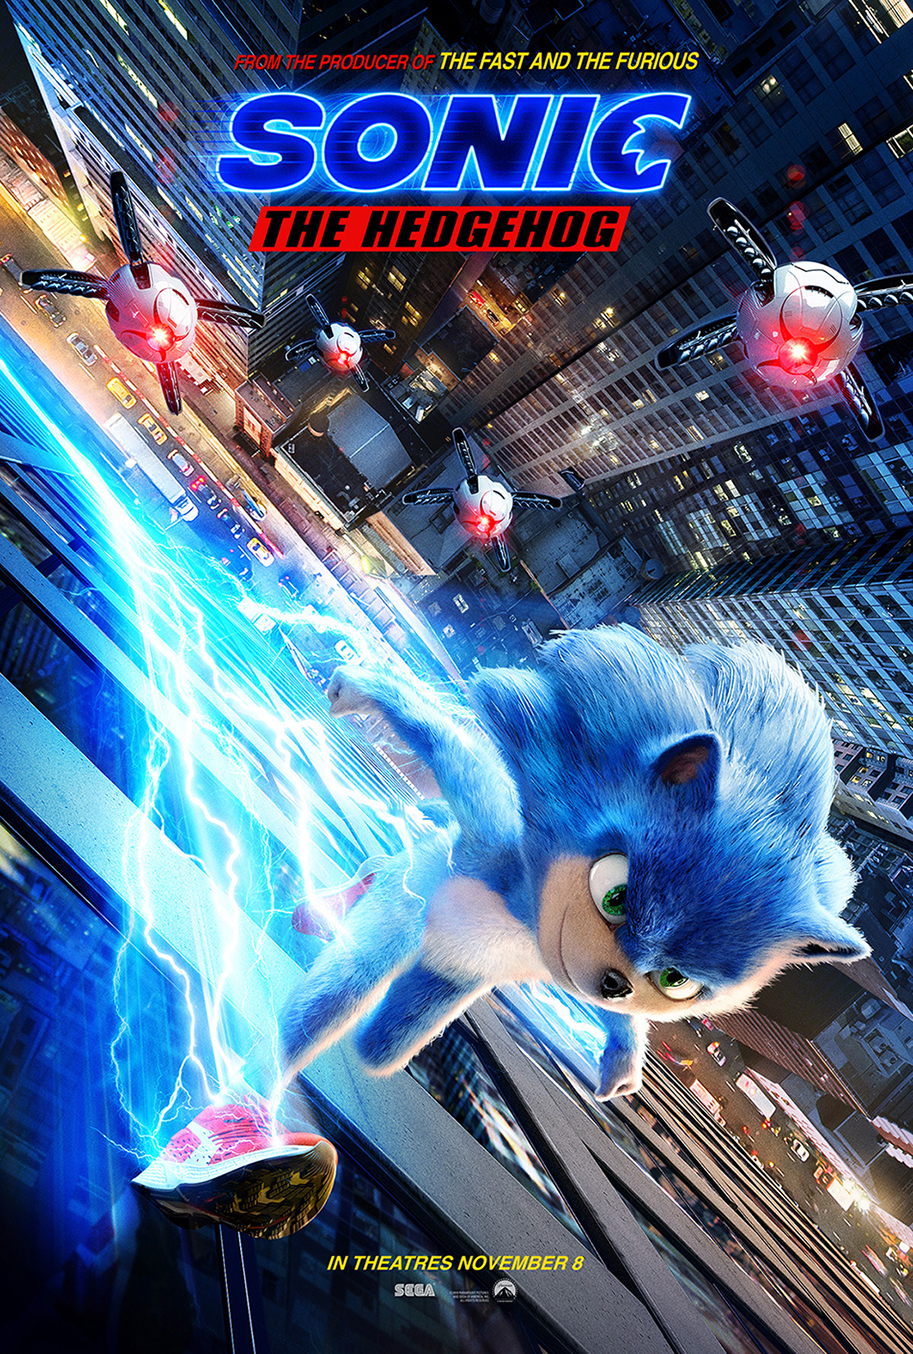 Sonic the Hedgehog, Paramount Pictures, Jim Carrey